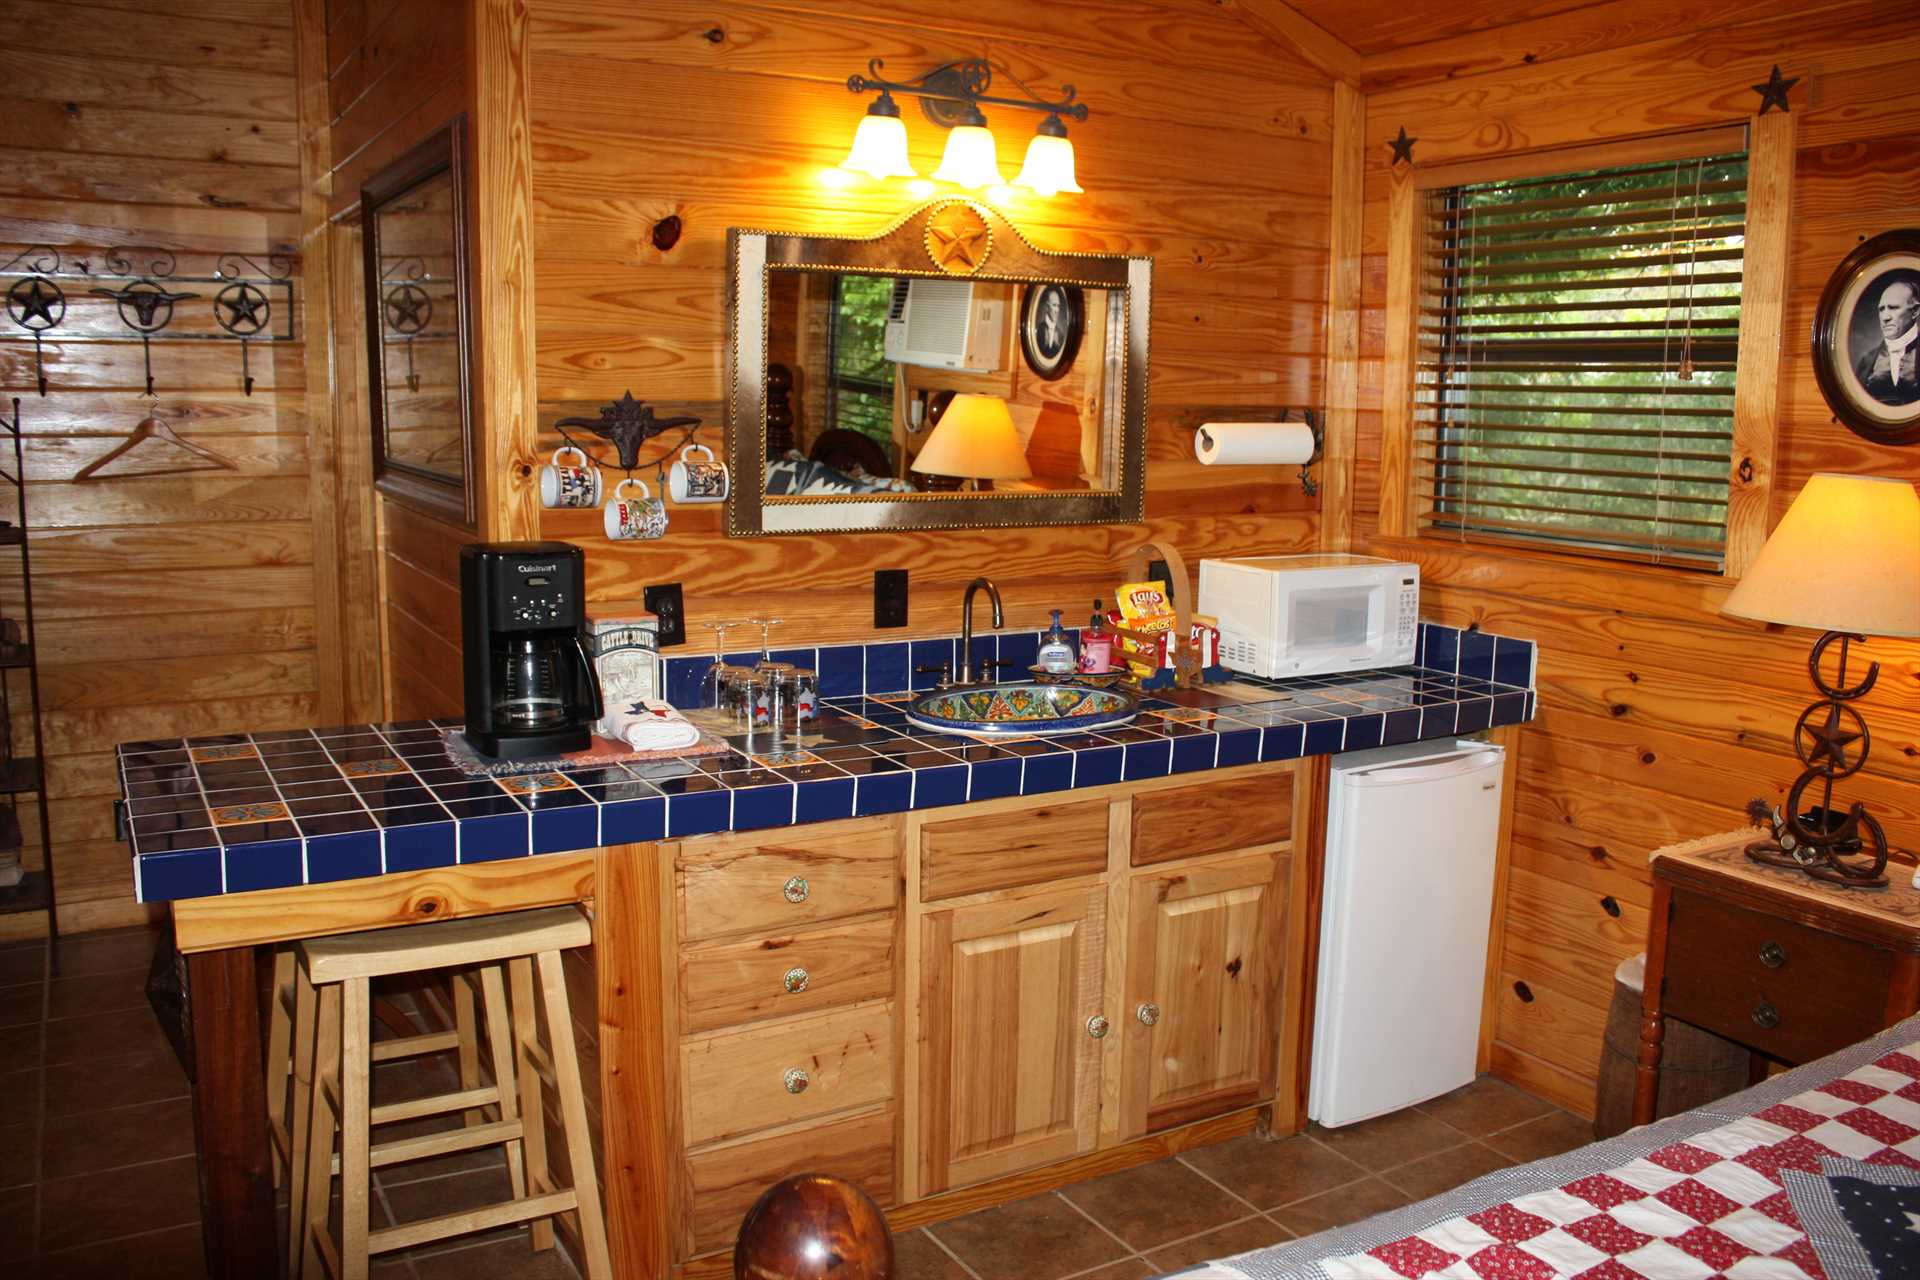                                                 The cozy kitchenette takes care of your basic necessities, complete with complimentary beverages.